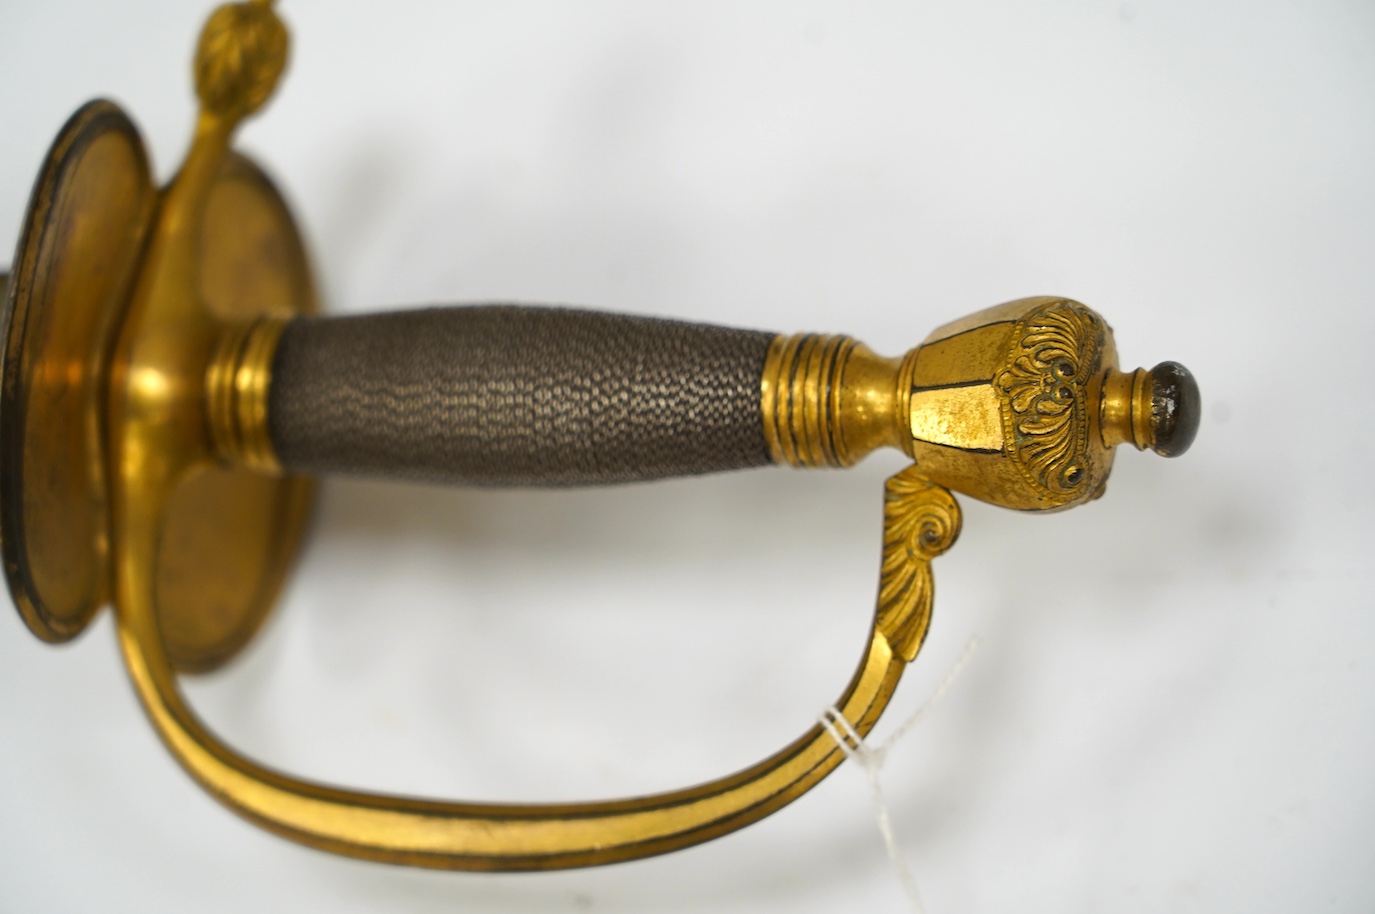 A 1796 pattern infantry officer's sword, blued and gilt blade, etched with crowned GR and Royal Arms, regulation gilt brass hilt, in its leather scabbard with brass mounts, locket signed S. Brunn, 81.5cm. Condition - goo